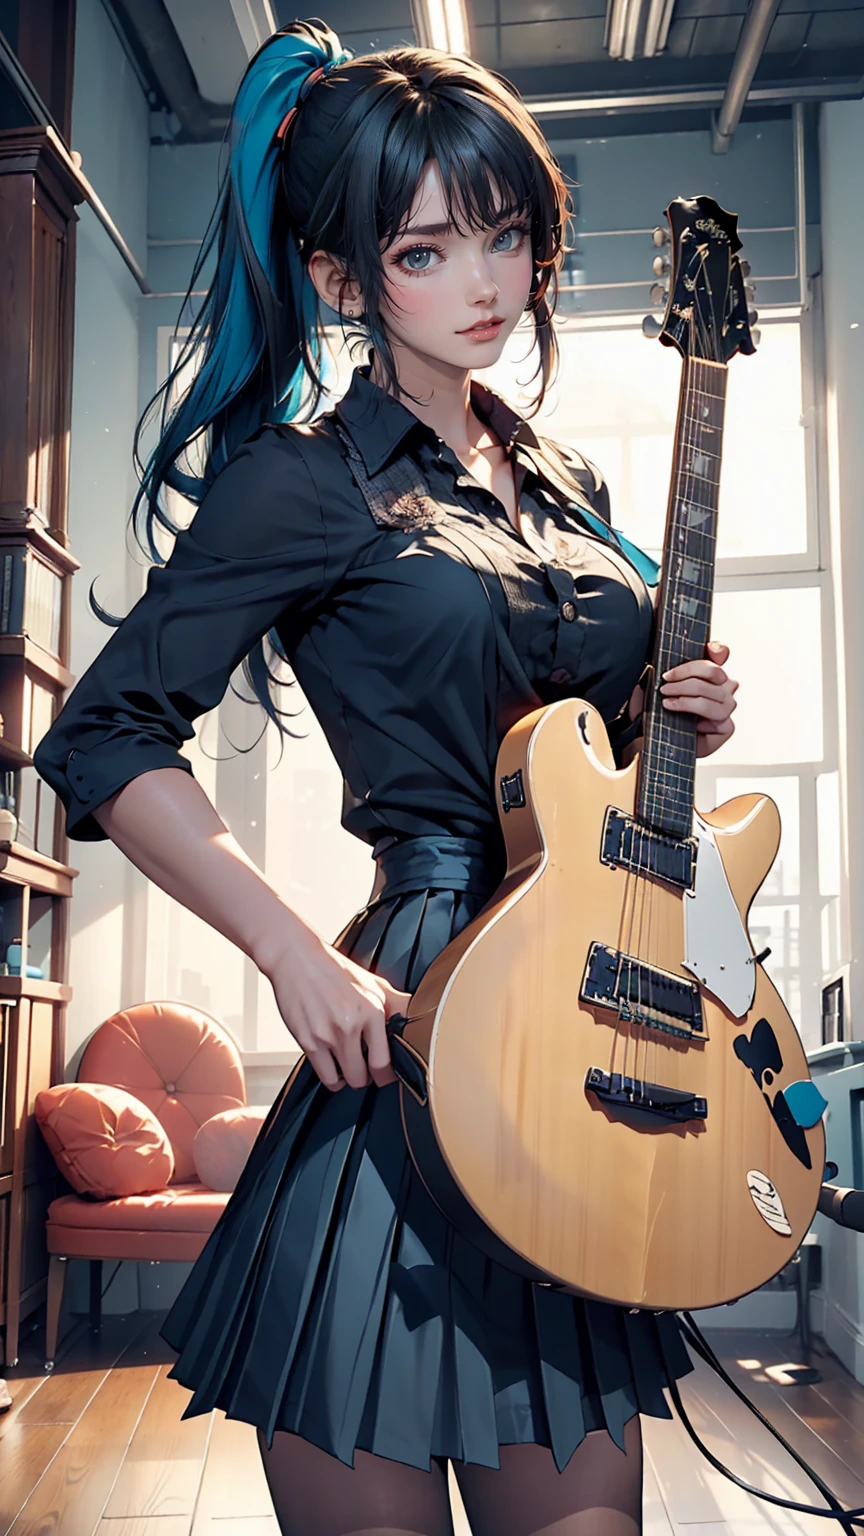 ((masterpiece, highest quality))One Girl, alone, Black Dress, blue eyes, electric guitar, guitar, Headphones, Double Ponytail, Holding, Holding plectrum, musical instrument, Long Hair, music, One side up, Turquoise Hair, Twin tails, guitarを弾く, Pleated skirt, Black Shirt, interior